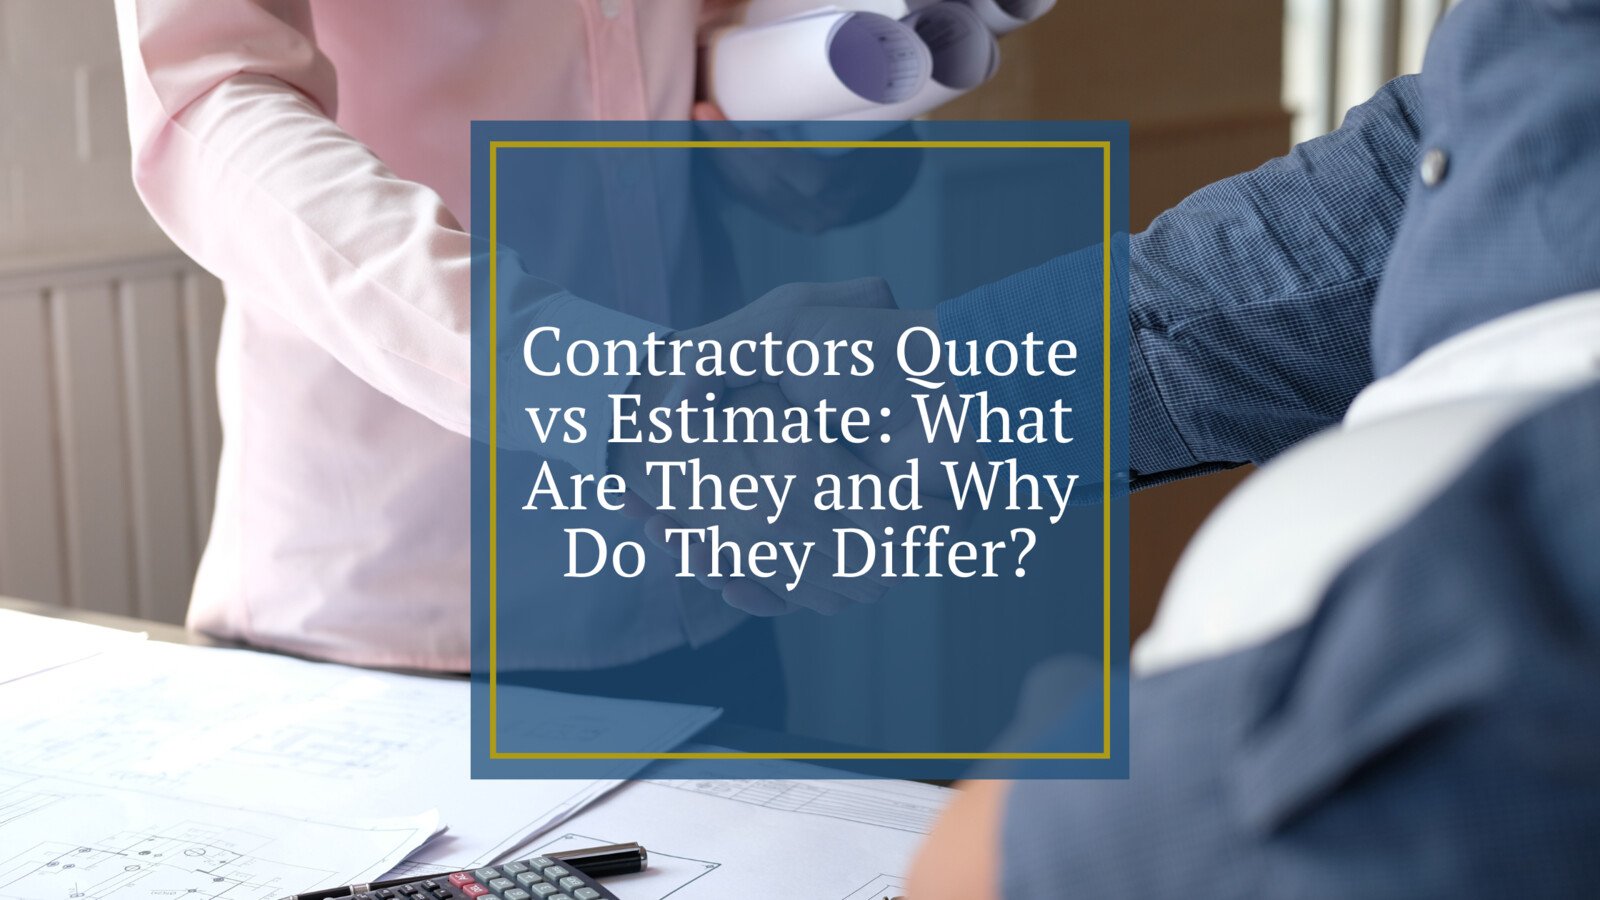 Contractors Quote vs Estimate: What Are They and Why Do They Differ?